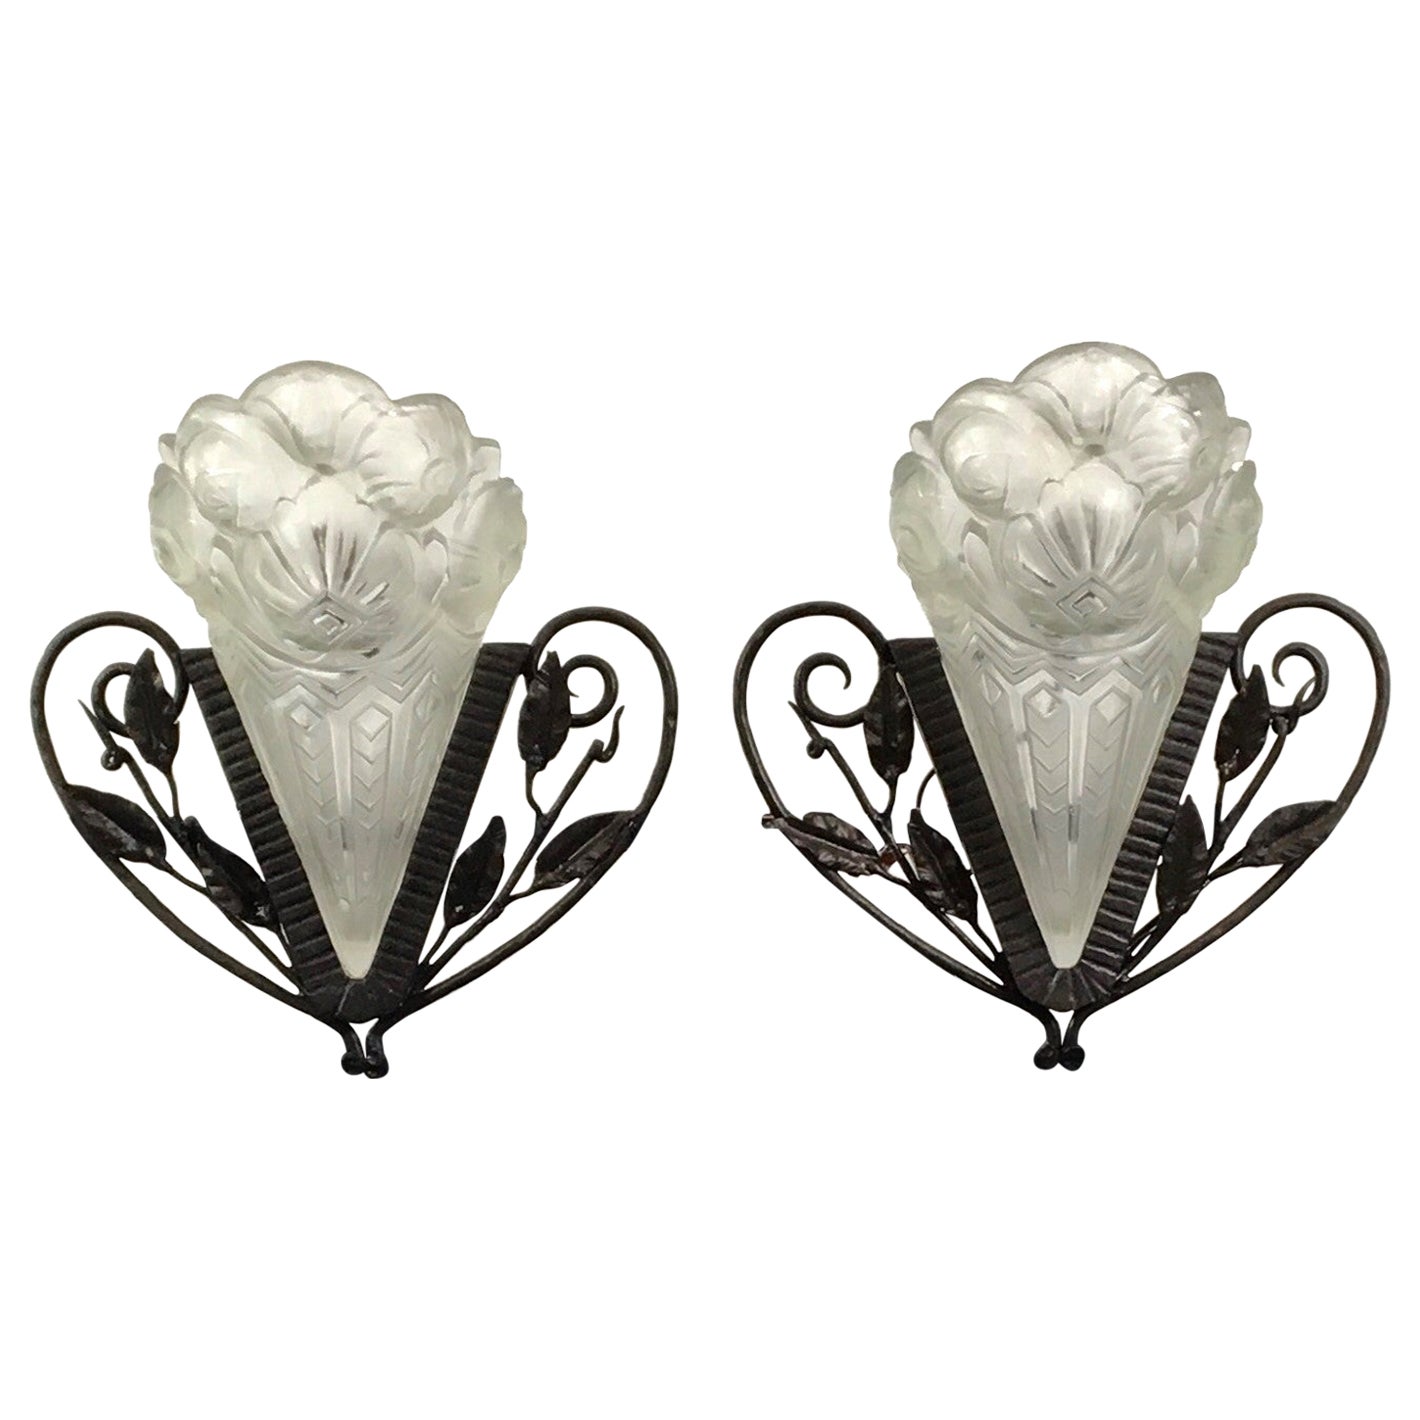  Pair of Art Deco Wall Scones with Molded Clear Frosted Glass, 2 Pair Available